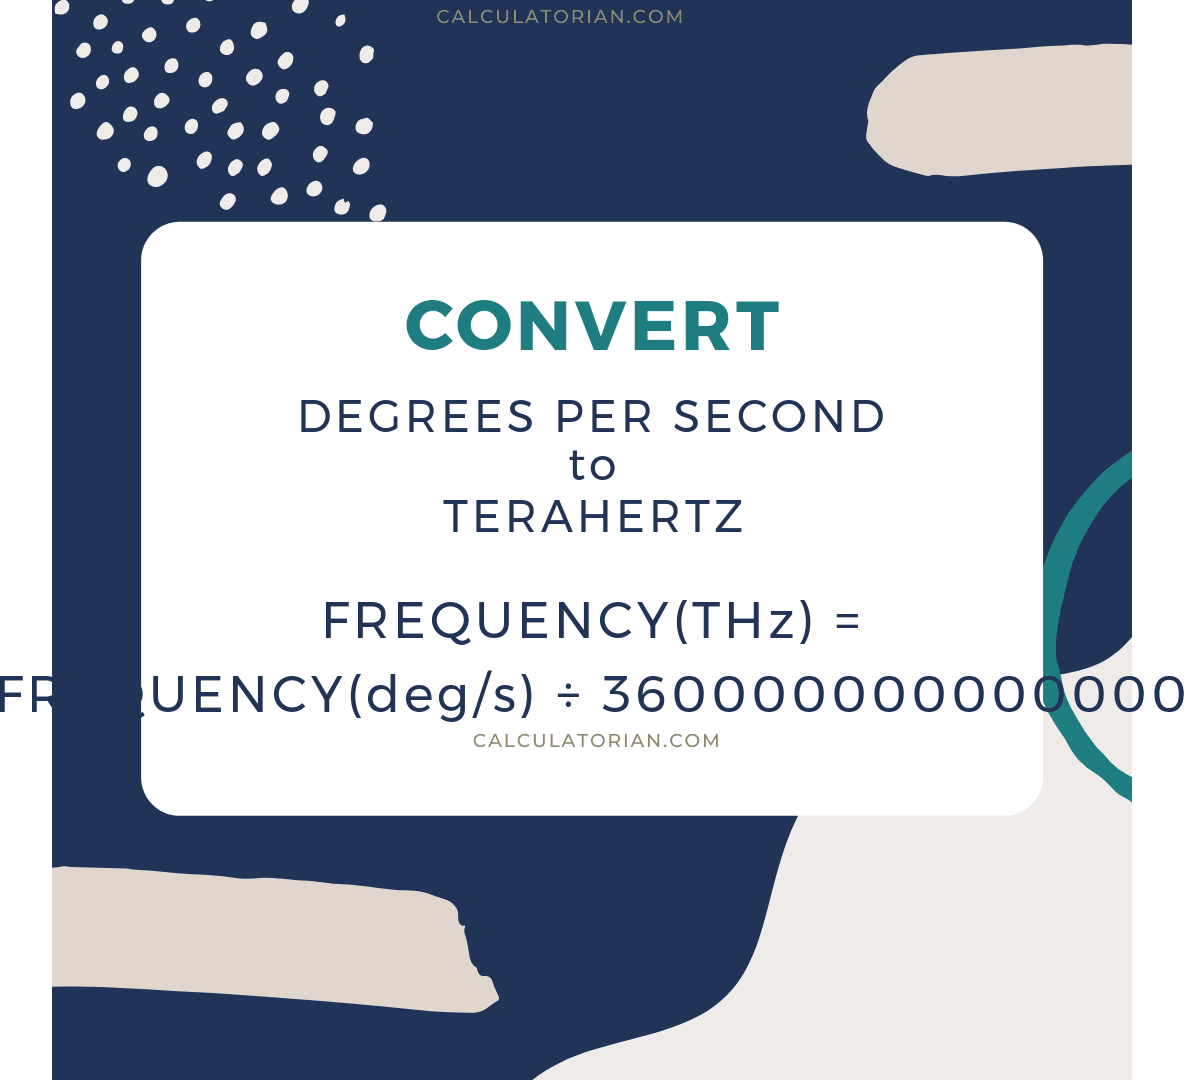 The formula for converting a frequency from degrees per second to terahertz